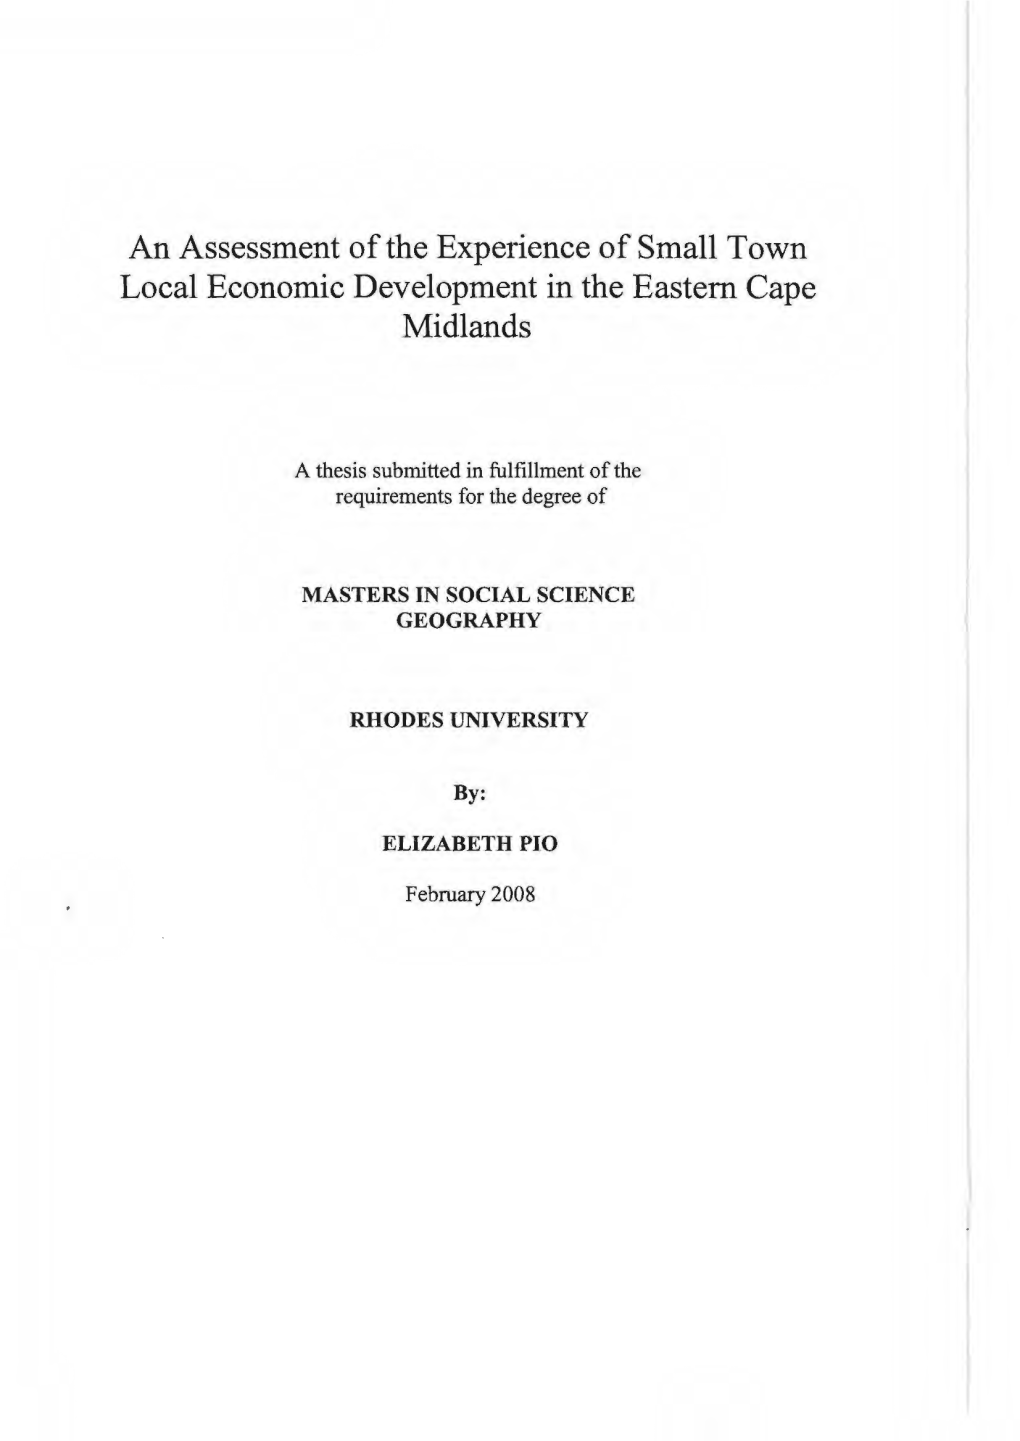 An Assessment of the Experience of Small Town Local Economic Development in the Eastern Cape Midlands